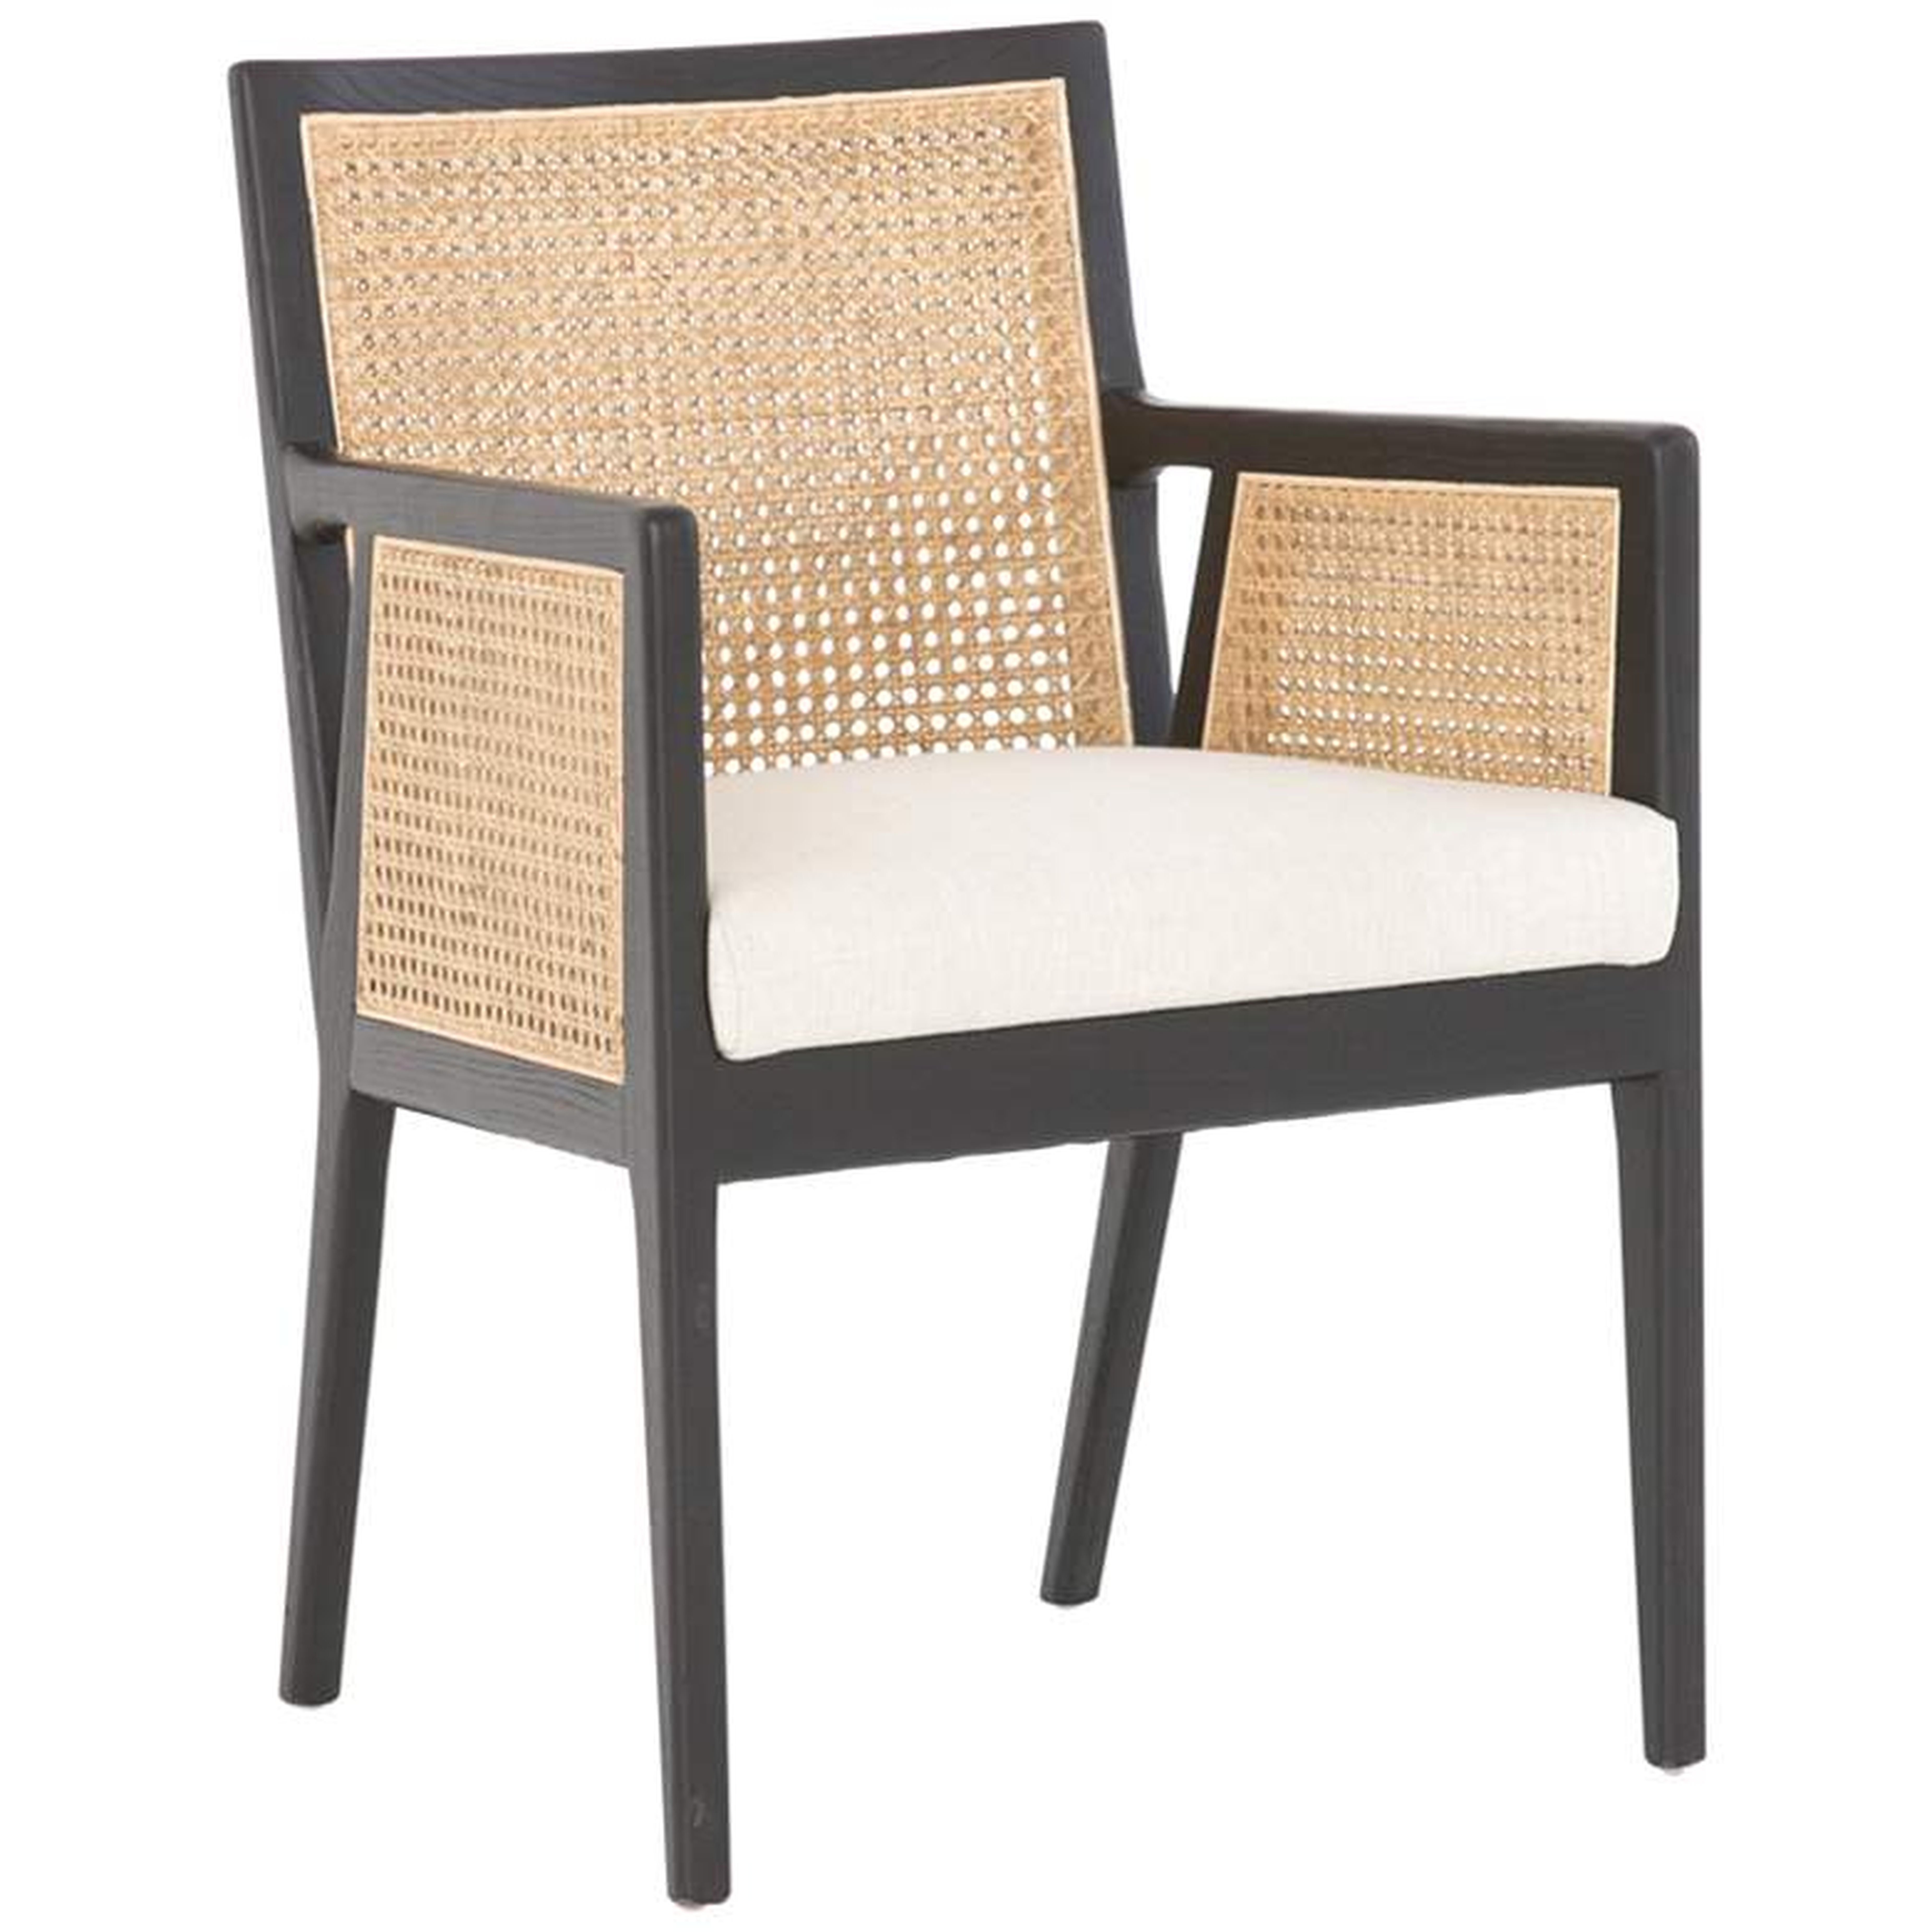 Antonia Linen and Brushed Ebony Nettlewood Dining Chair - Style # 96D42 - Lamps Plus